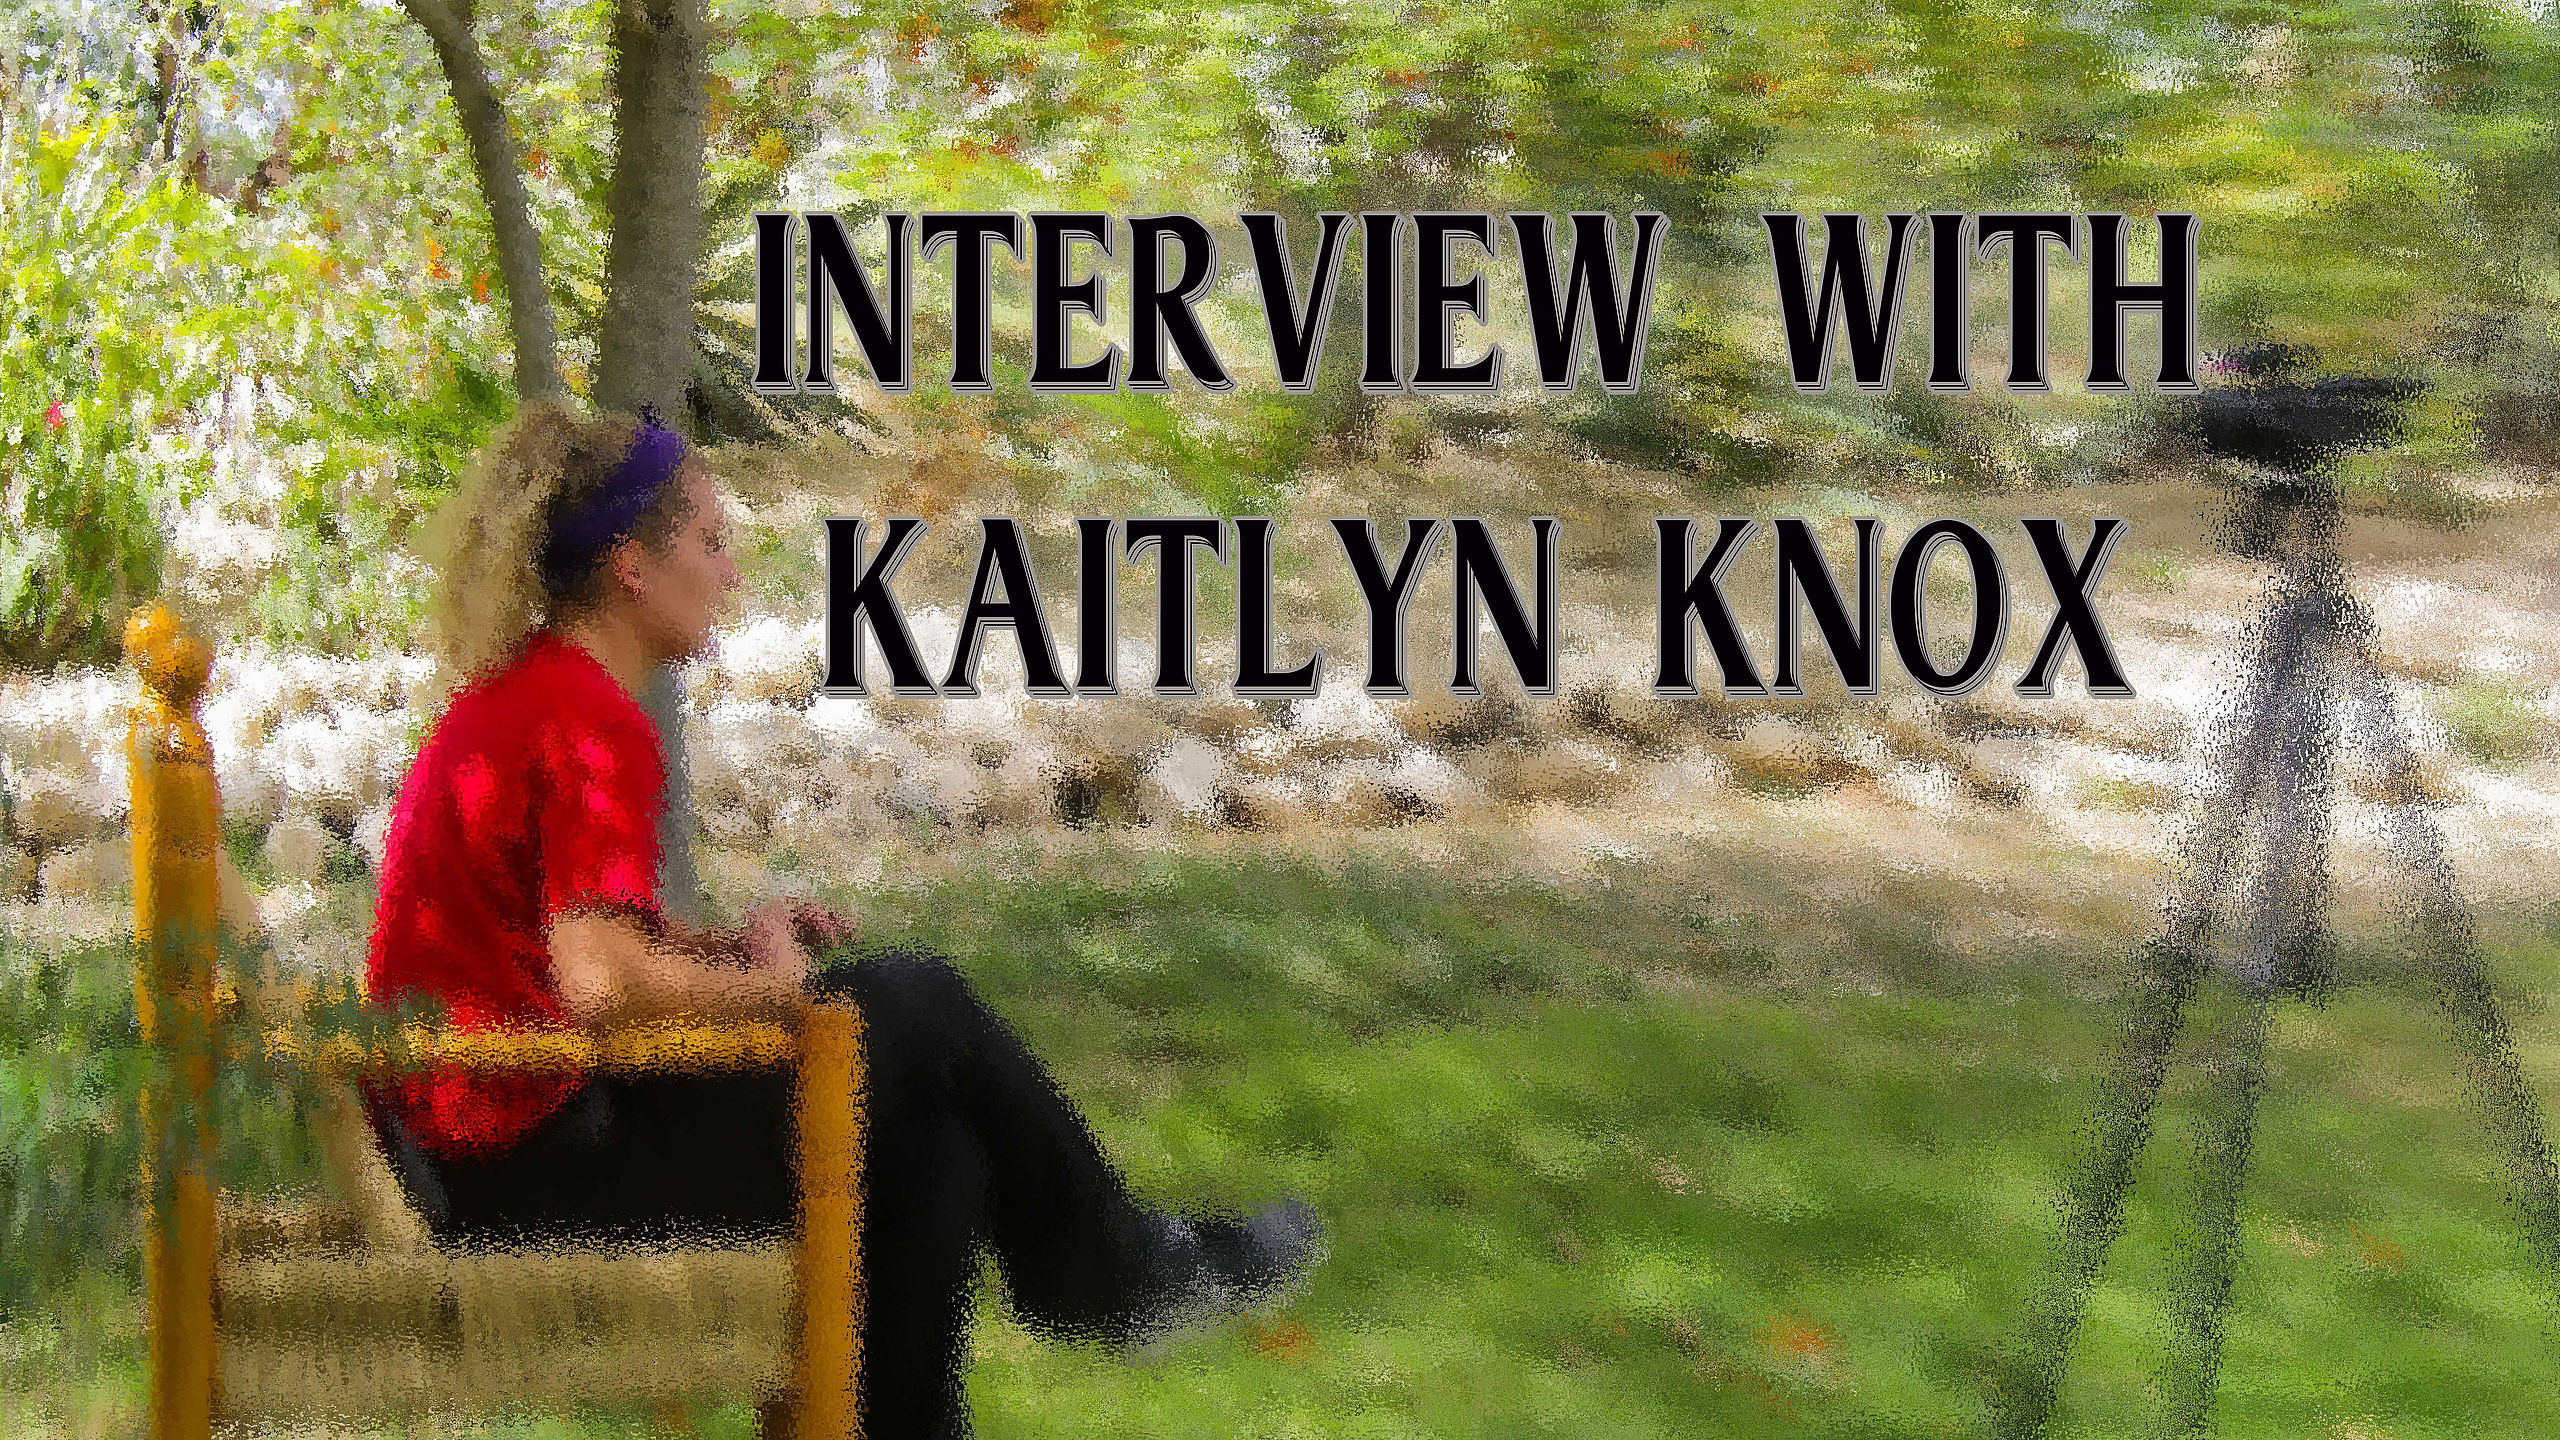 Interview with Kaitlyn Knox 2018